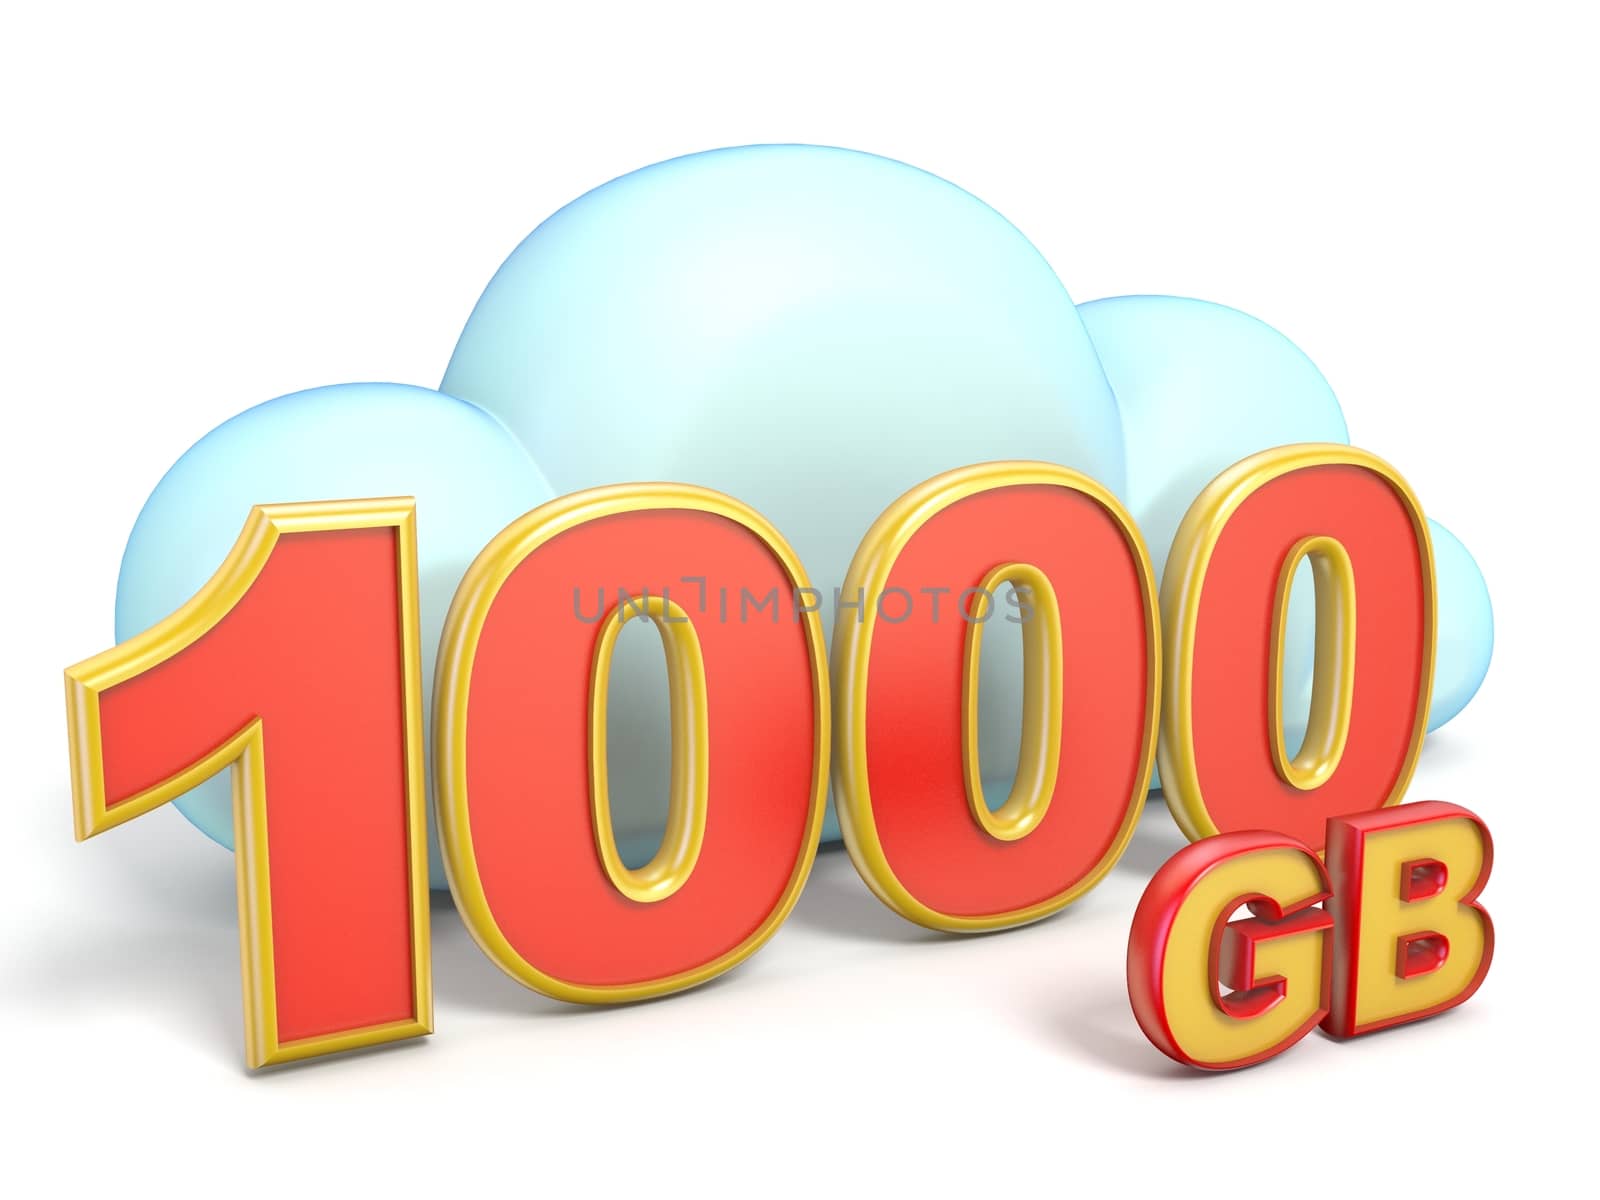 Cloud icon 1000 GB storage capacity 3D rendering isolated on white background